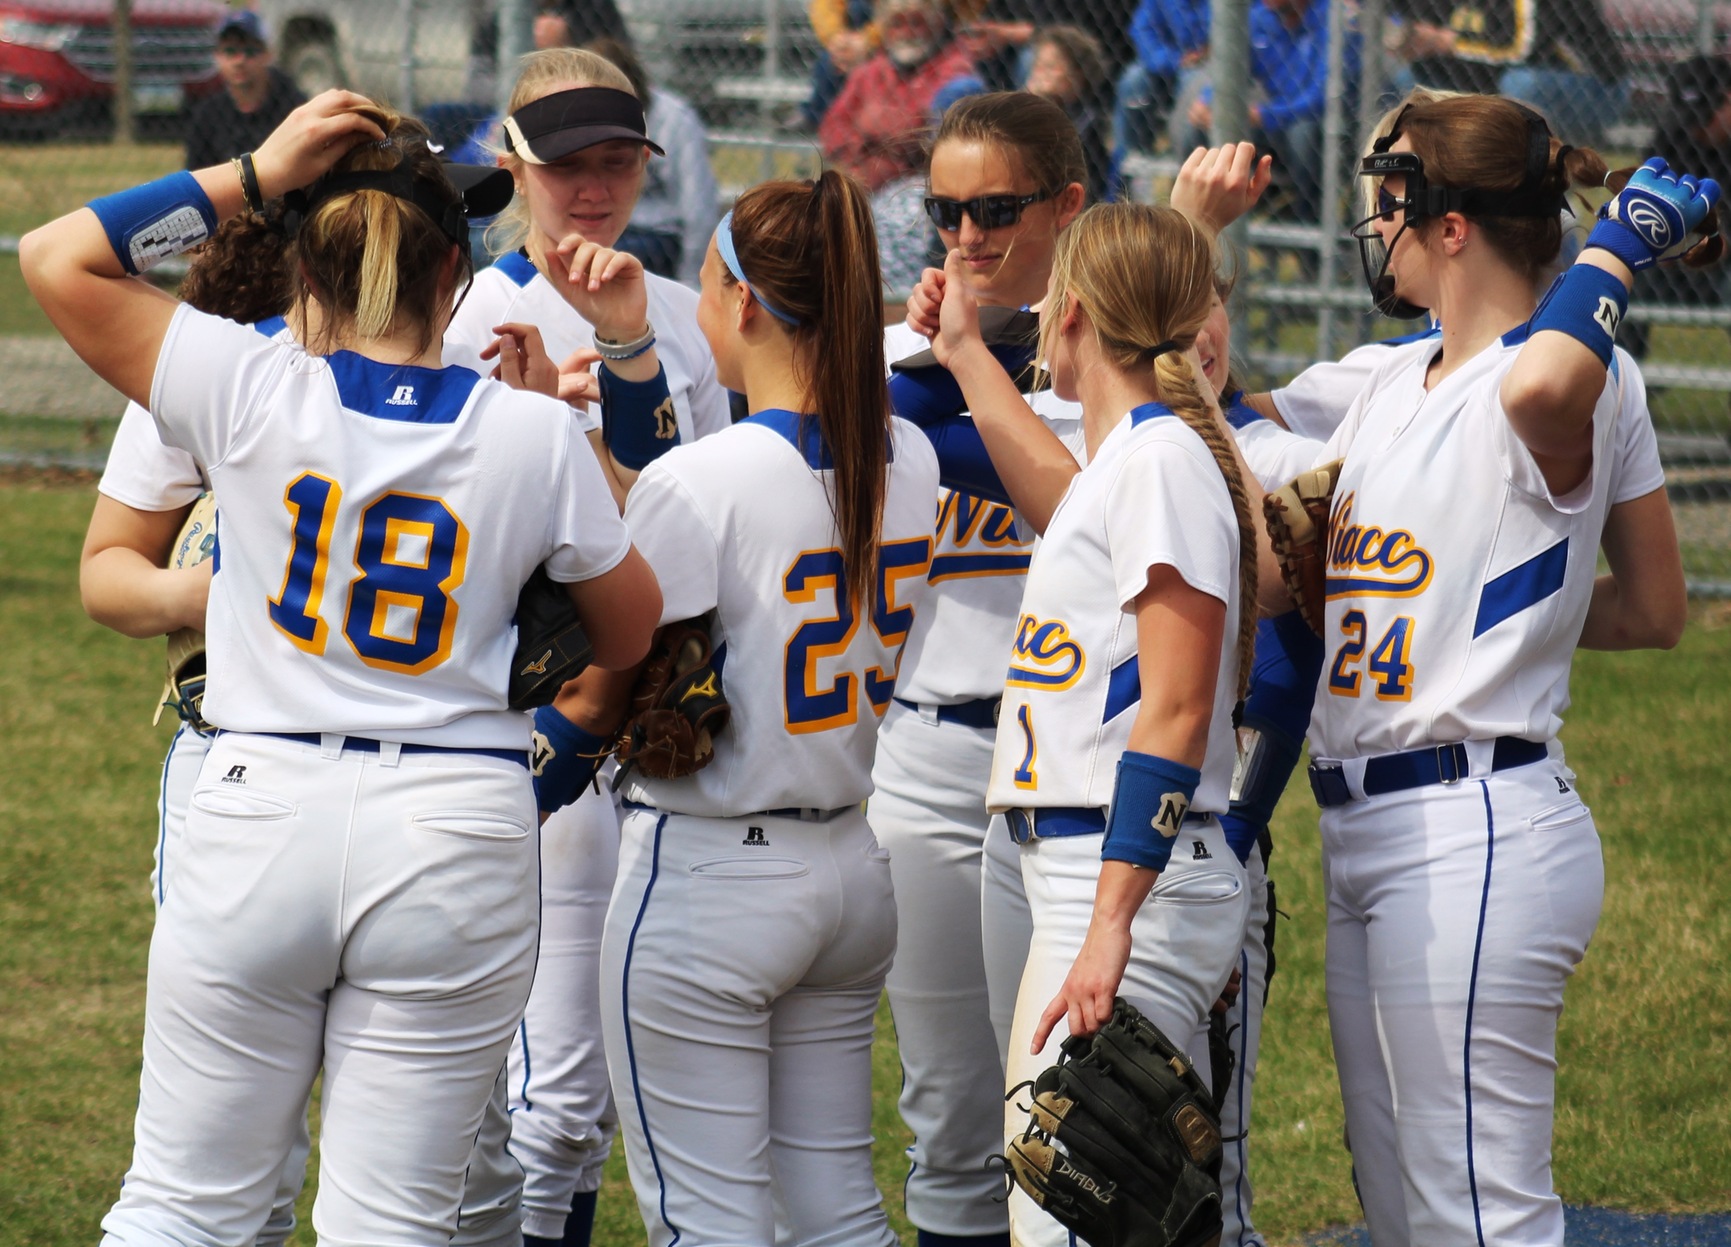 The NIACC softball team plays at DMACC in a doubleheader Friday starting at 1 p.m.